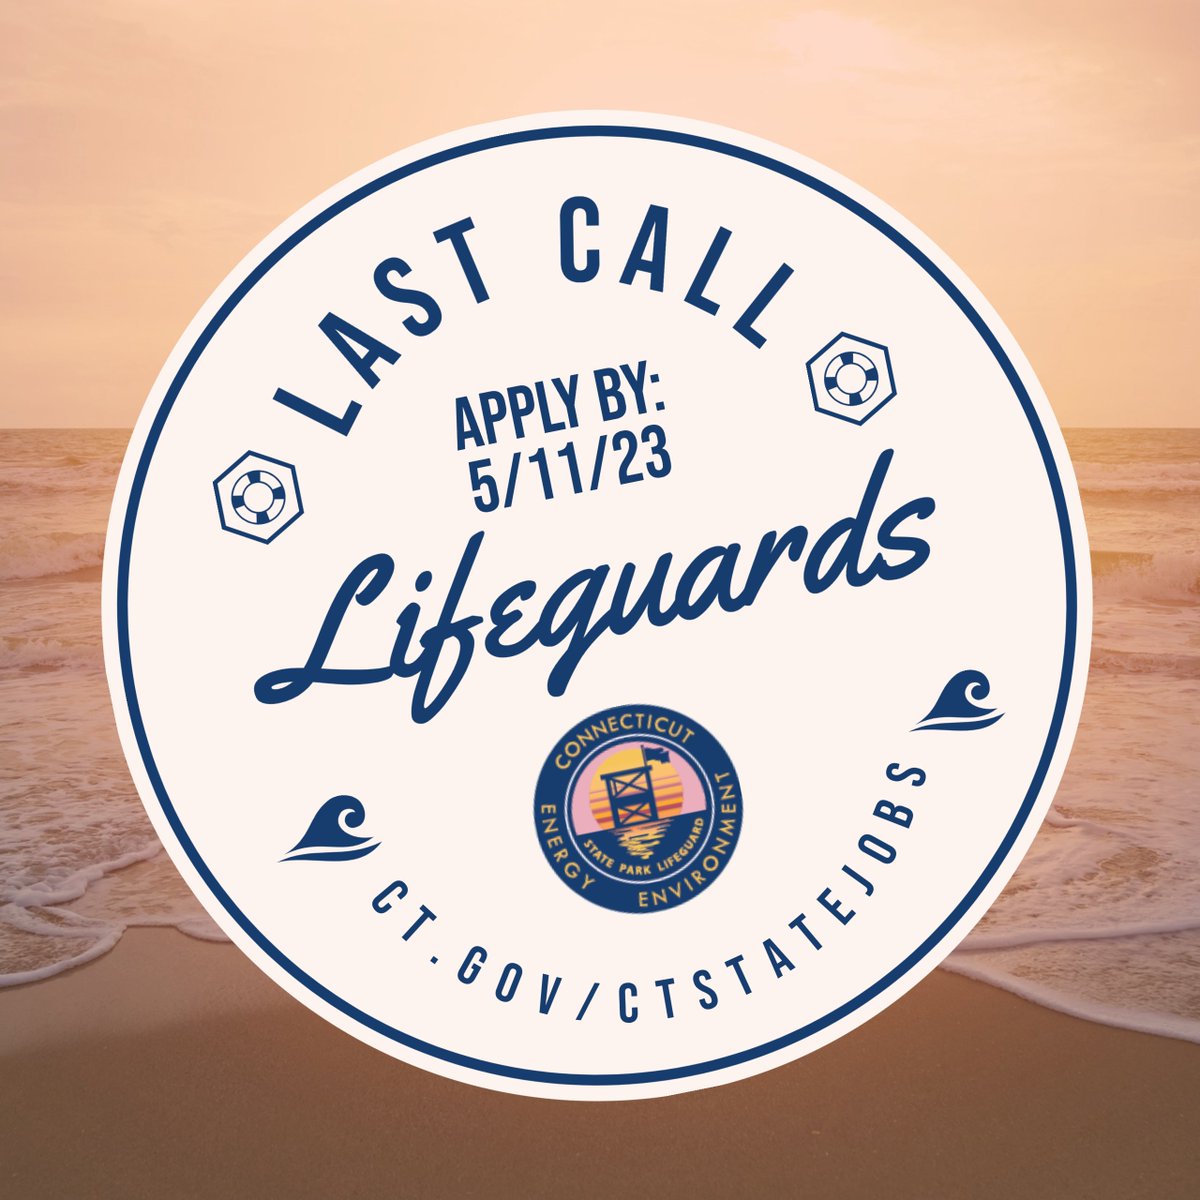 Last call to apply to be a Lifeguard at your favorite State Park! All training is provided and paid - Make friends, gain valuable skills and get outside this summer! Apply by 11:59pm on 5/11/23.
#hiring #lifeguards #lifeguardjobs #environmentaljobs @CTDEEPNews 🏖 ☀